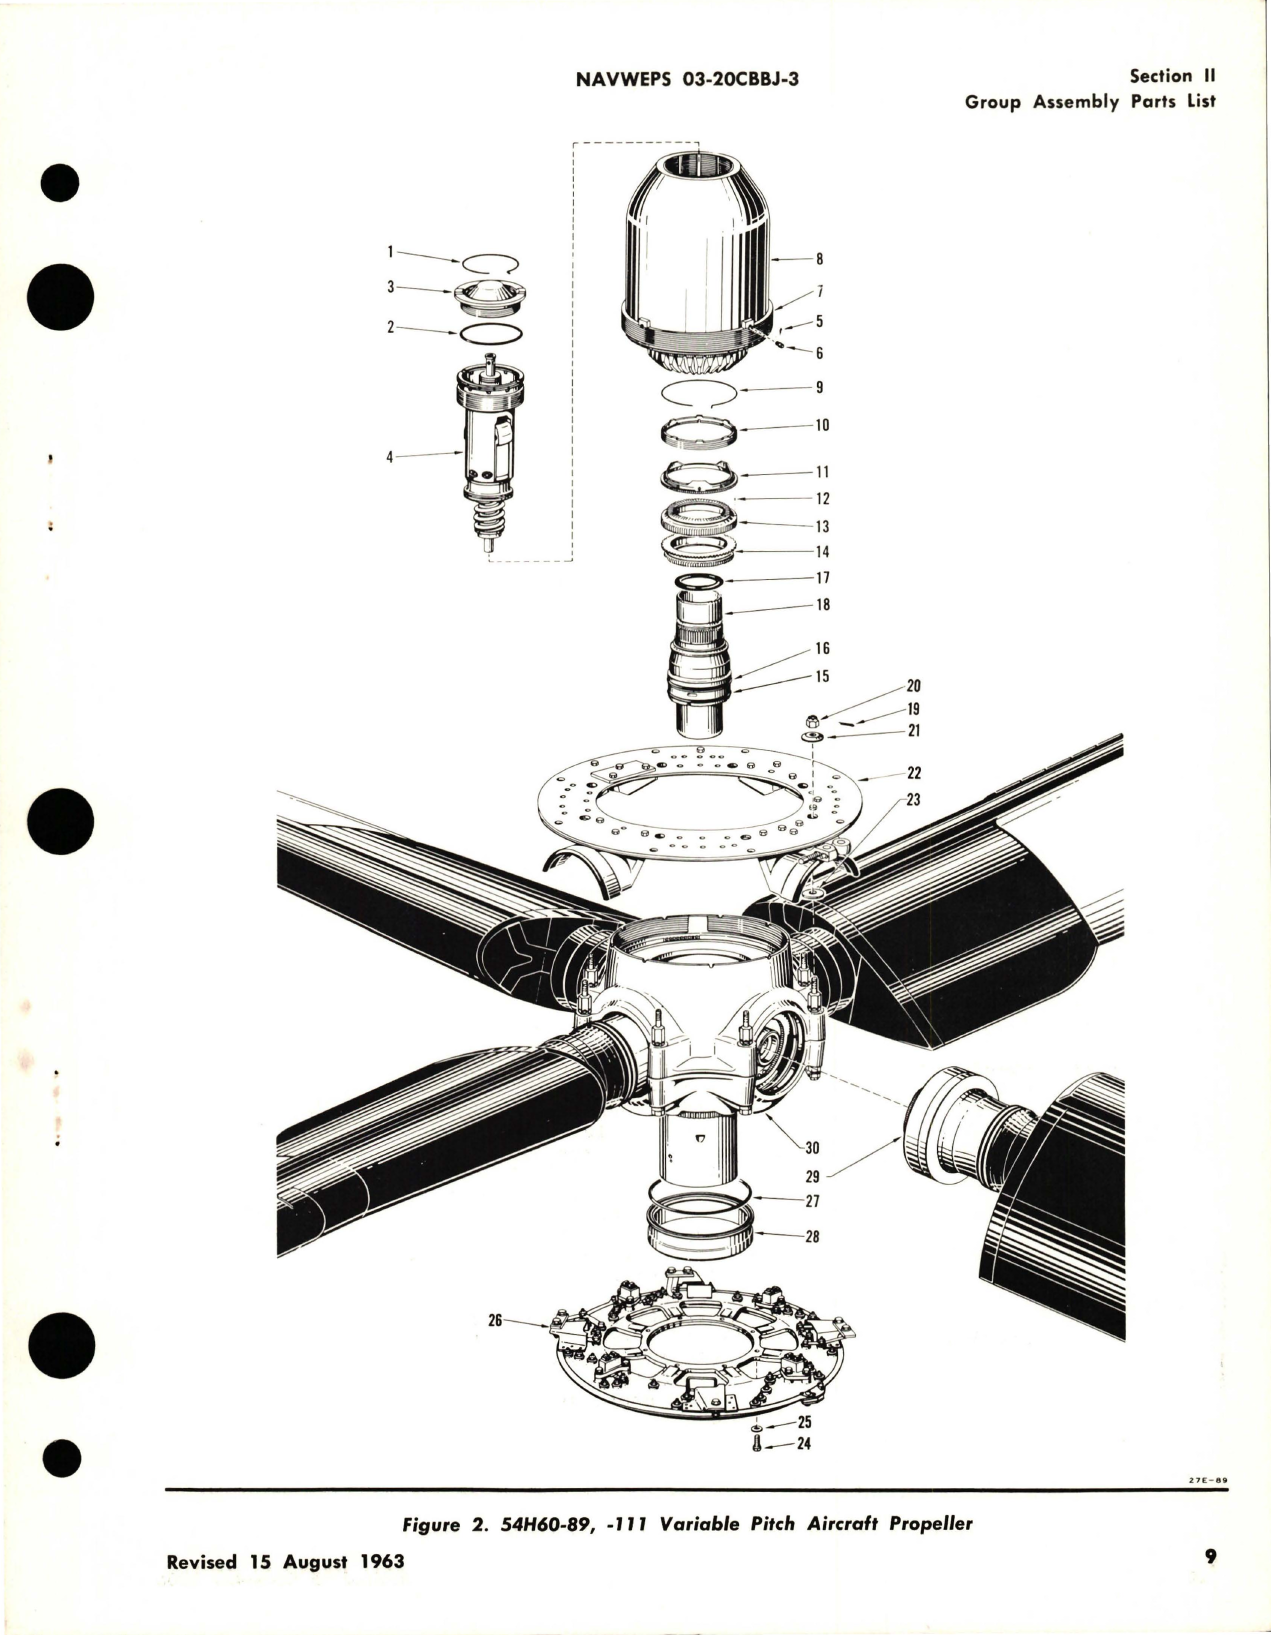 Sample page 5 from AirCorps Library document: Variable Pitch Propeller - Model 54H60-73, 54H60-75, 54H60-85, 54H60-89, and 54H60-111